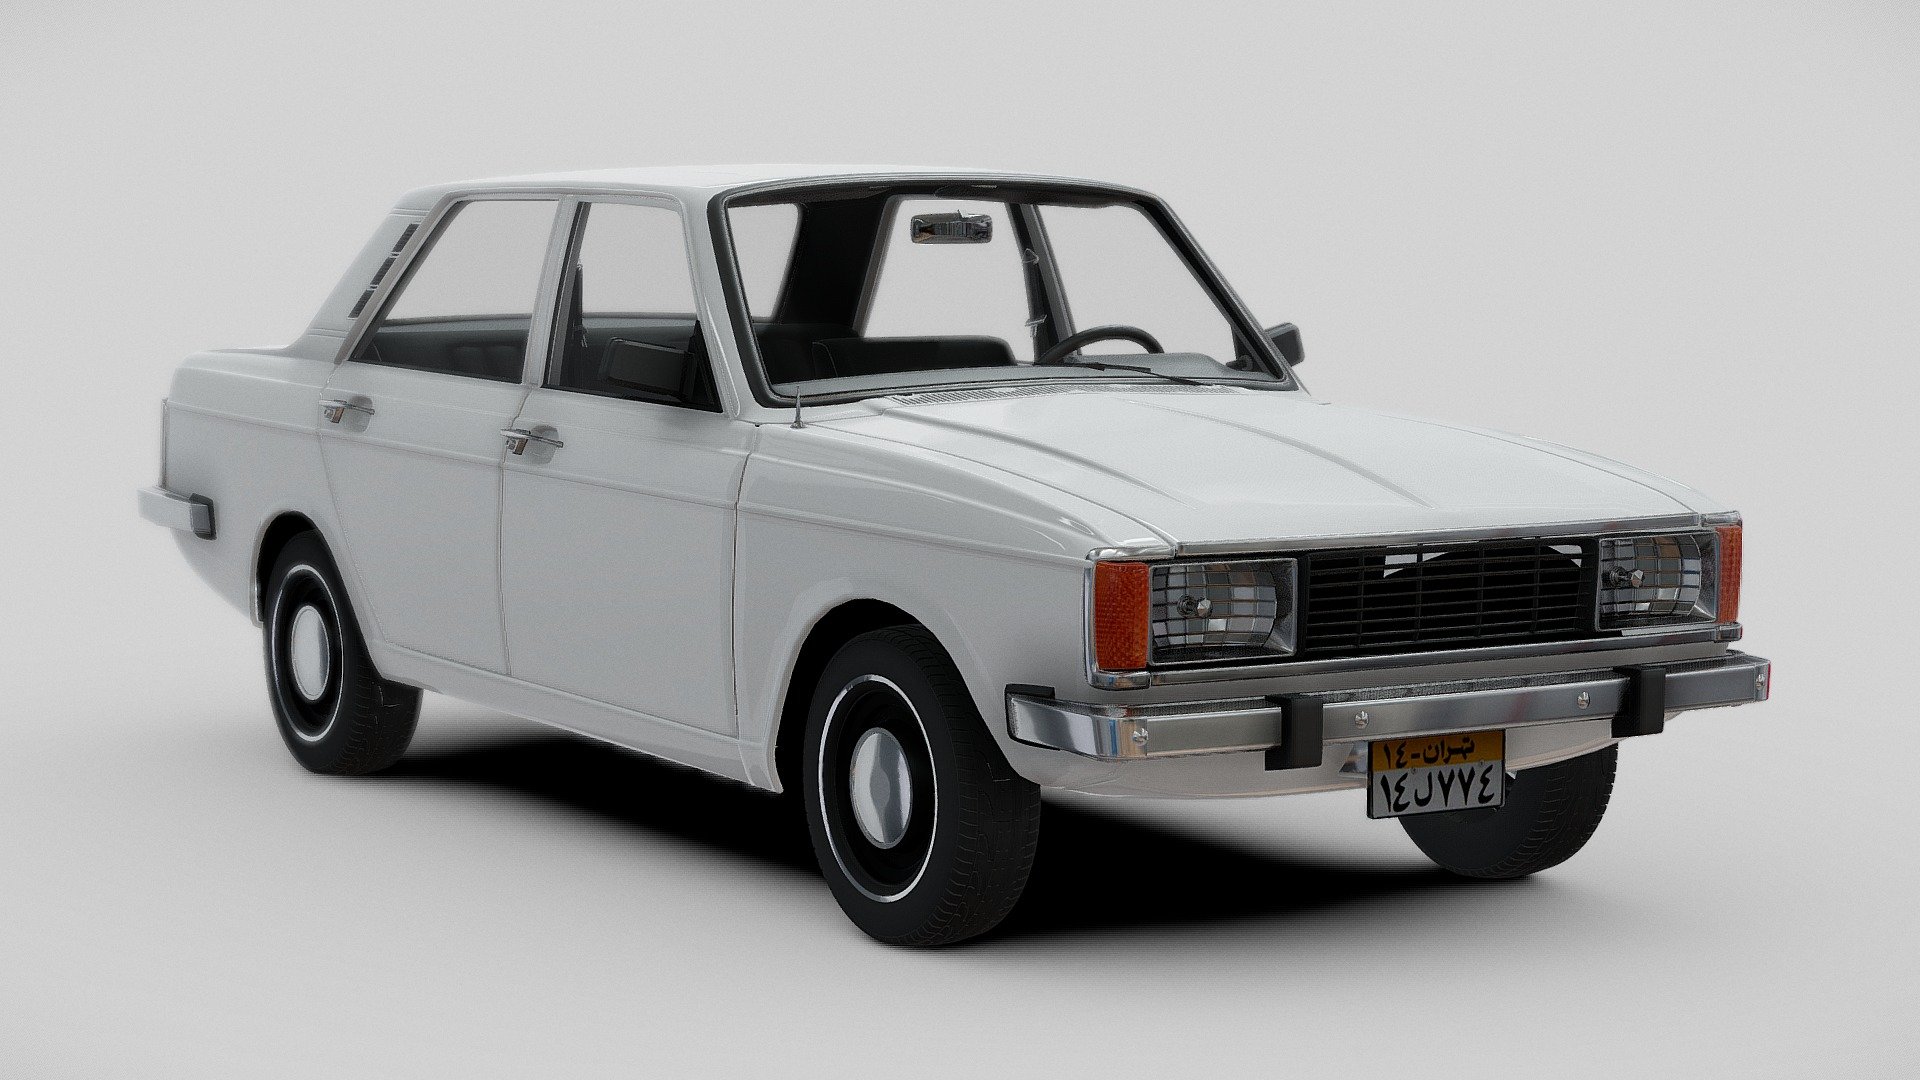 3d car model of peykan (soltan)

The Paykan (Persian: پيکان meaning Arrow), is the first Iranian-made car produced by Iran Khodro between 1967 and 2005. The car, formerly called &ldquo;Iran National